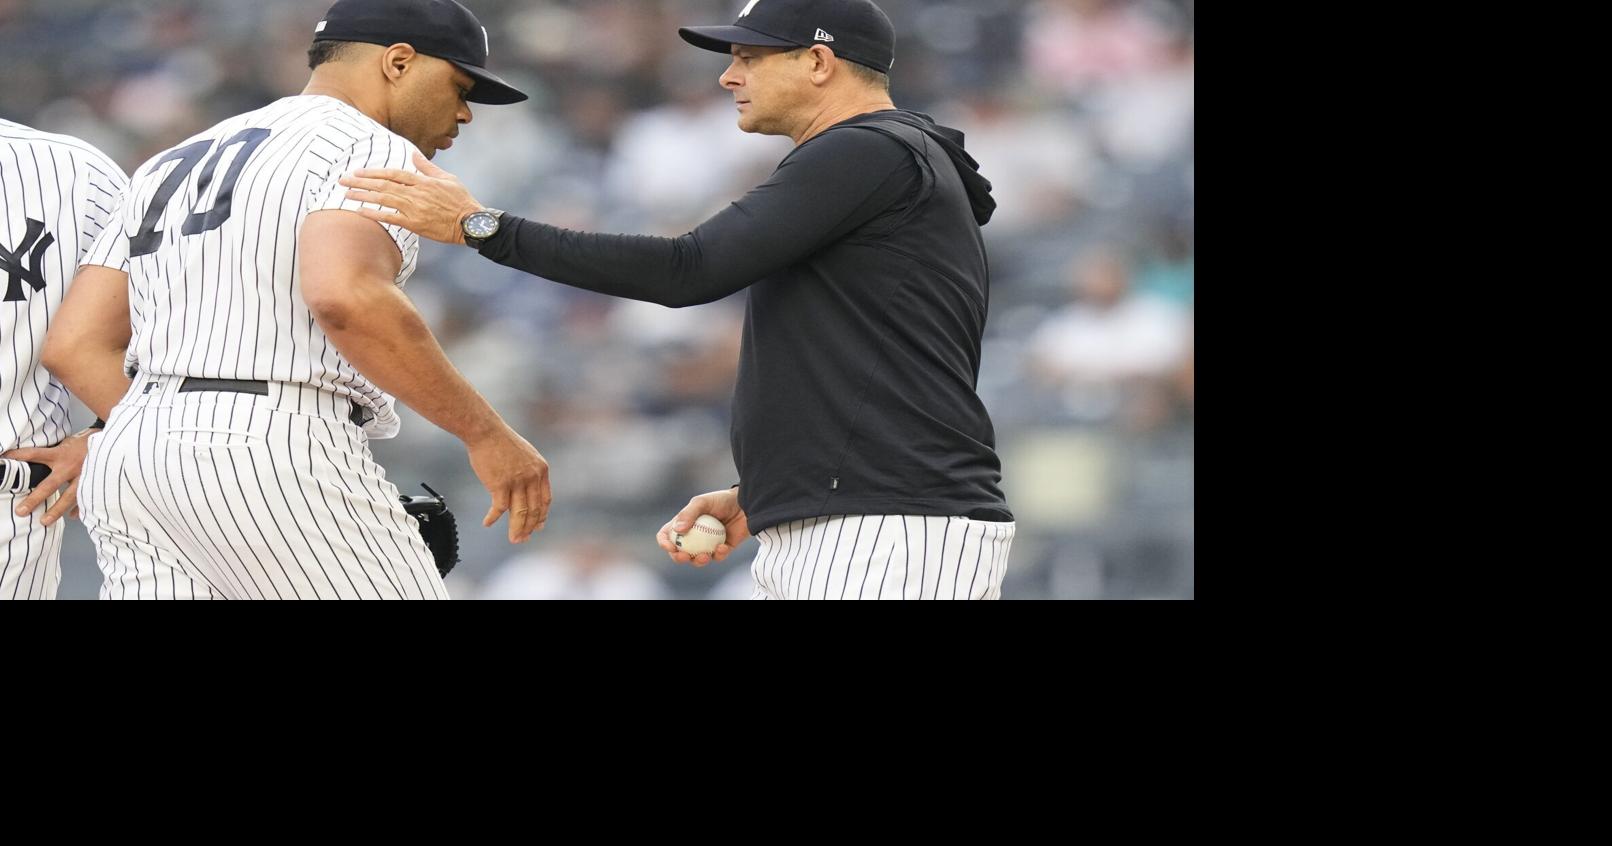 Yankees' manager Aaron Boone on reunion with recently released